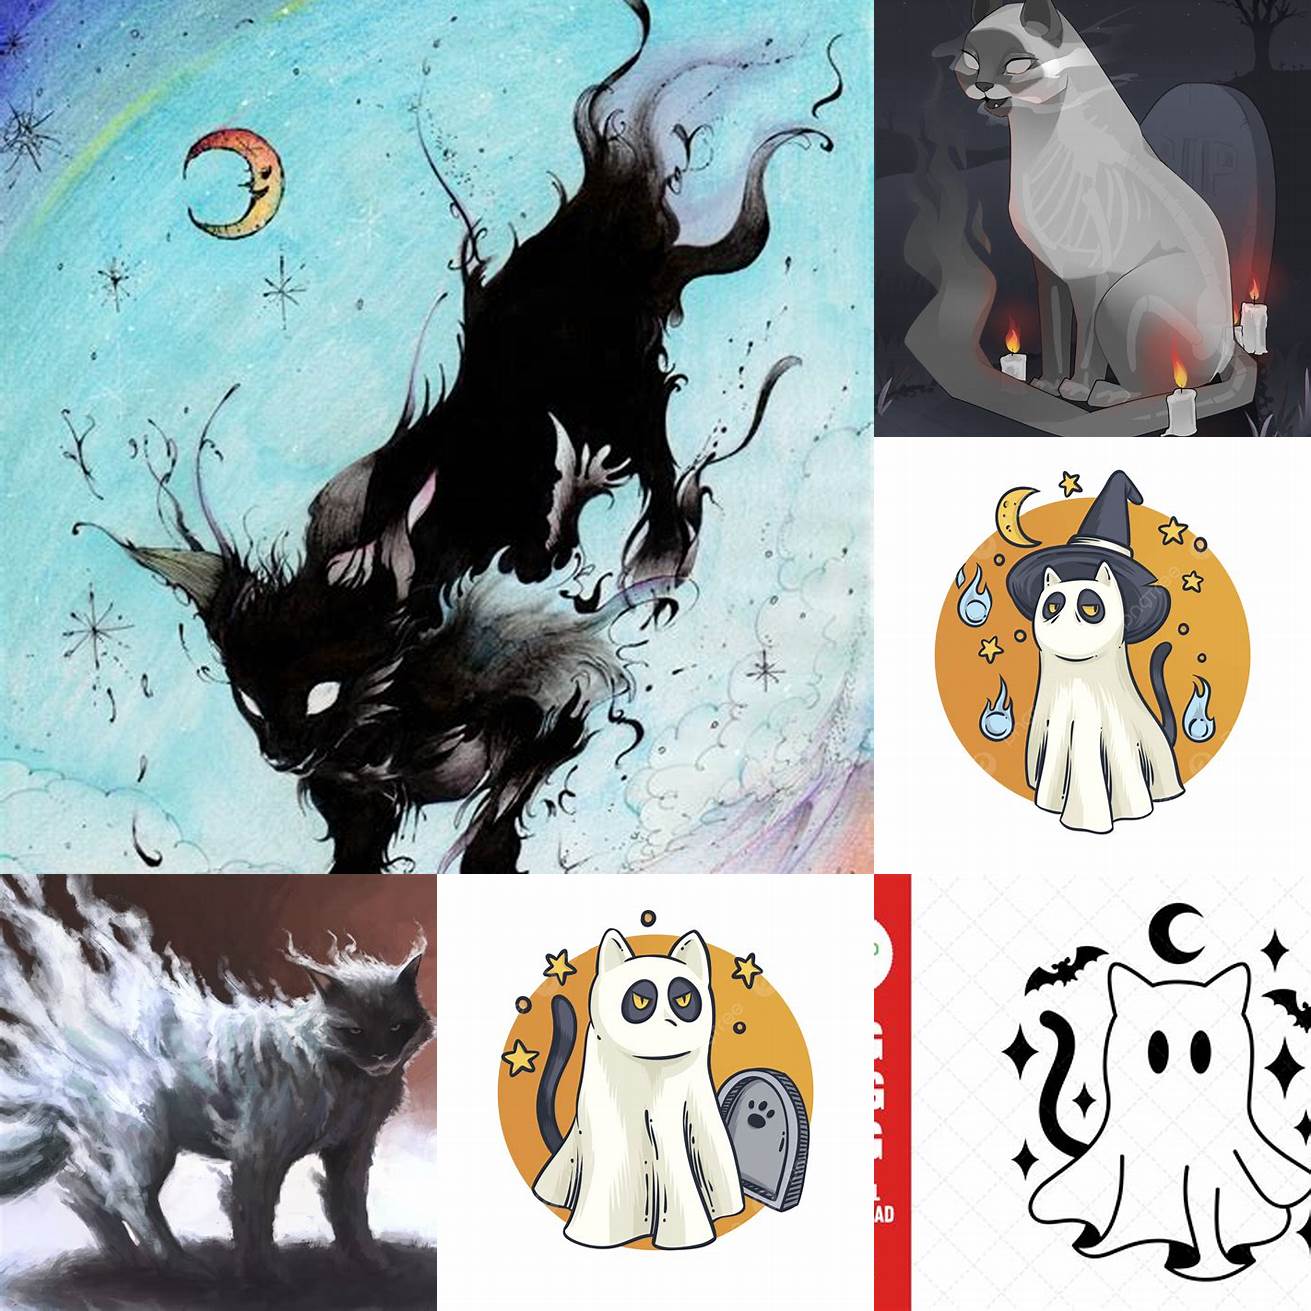 The Design of the Ghost Cat